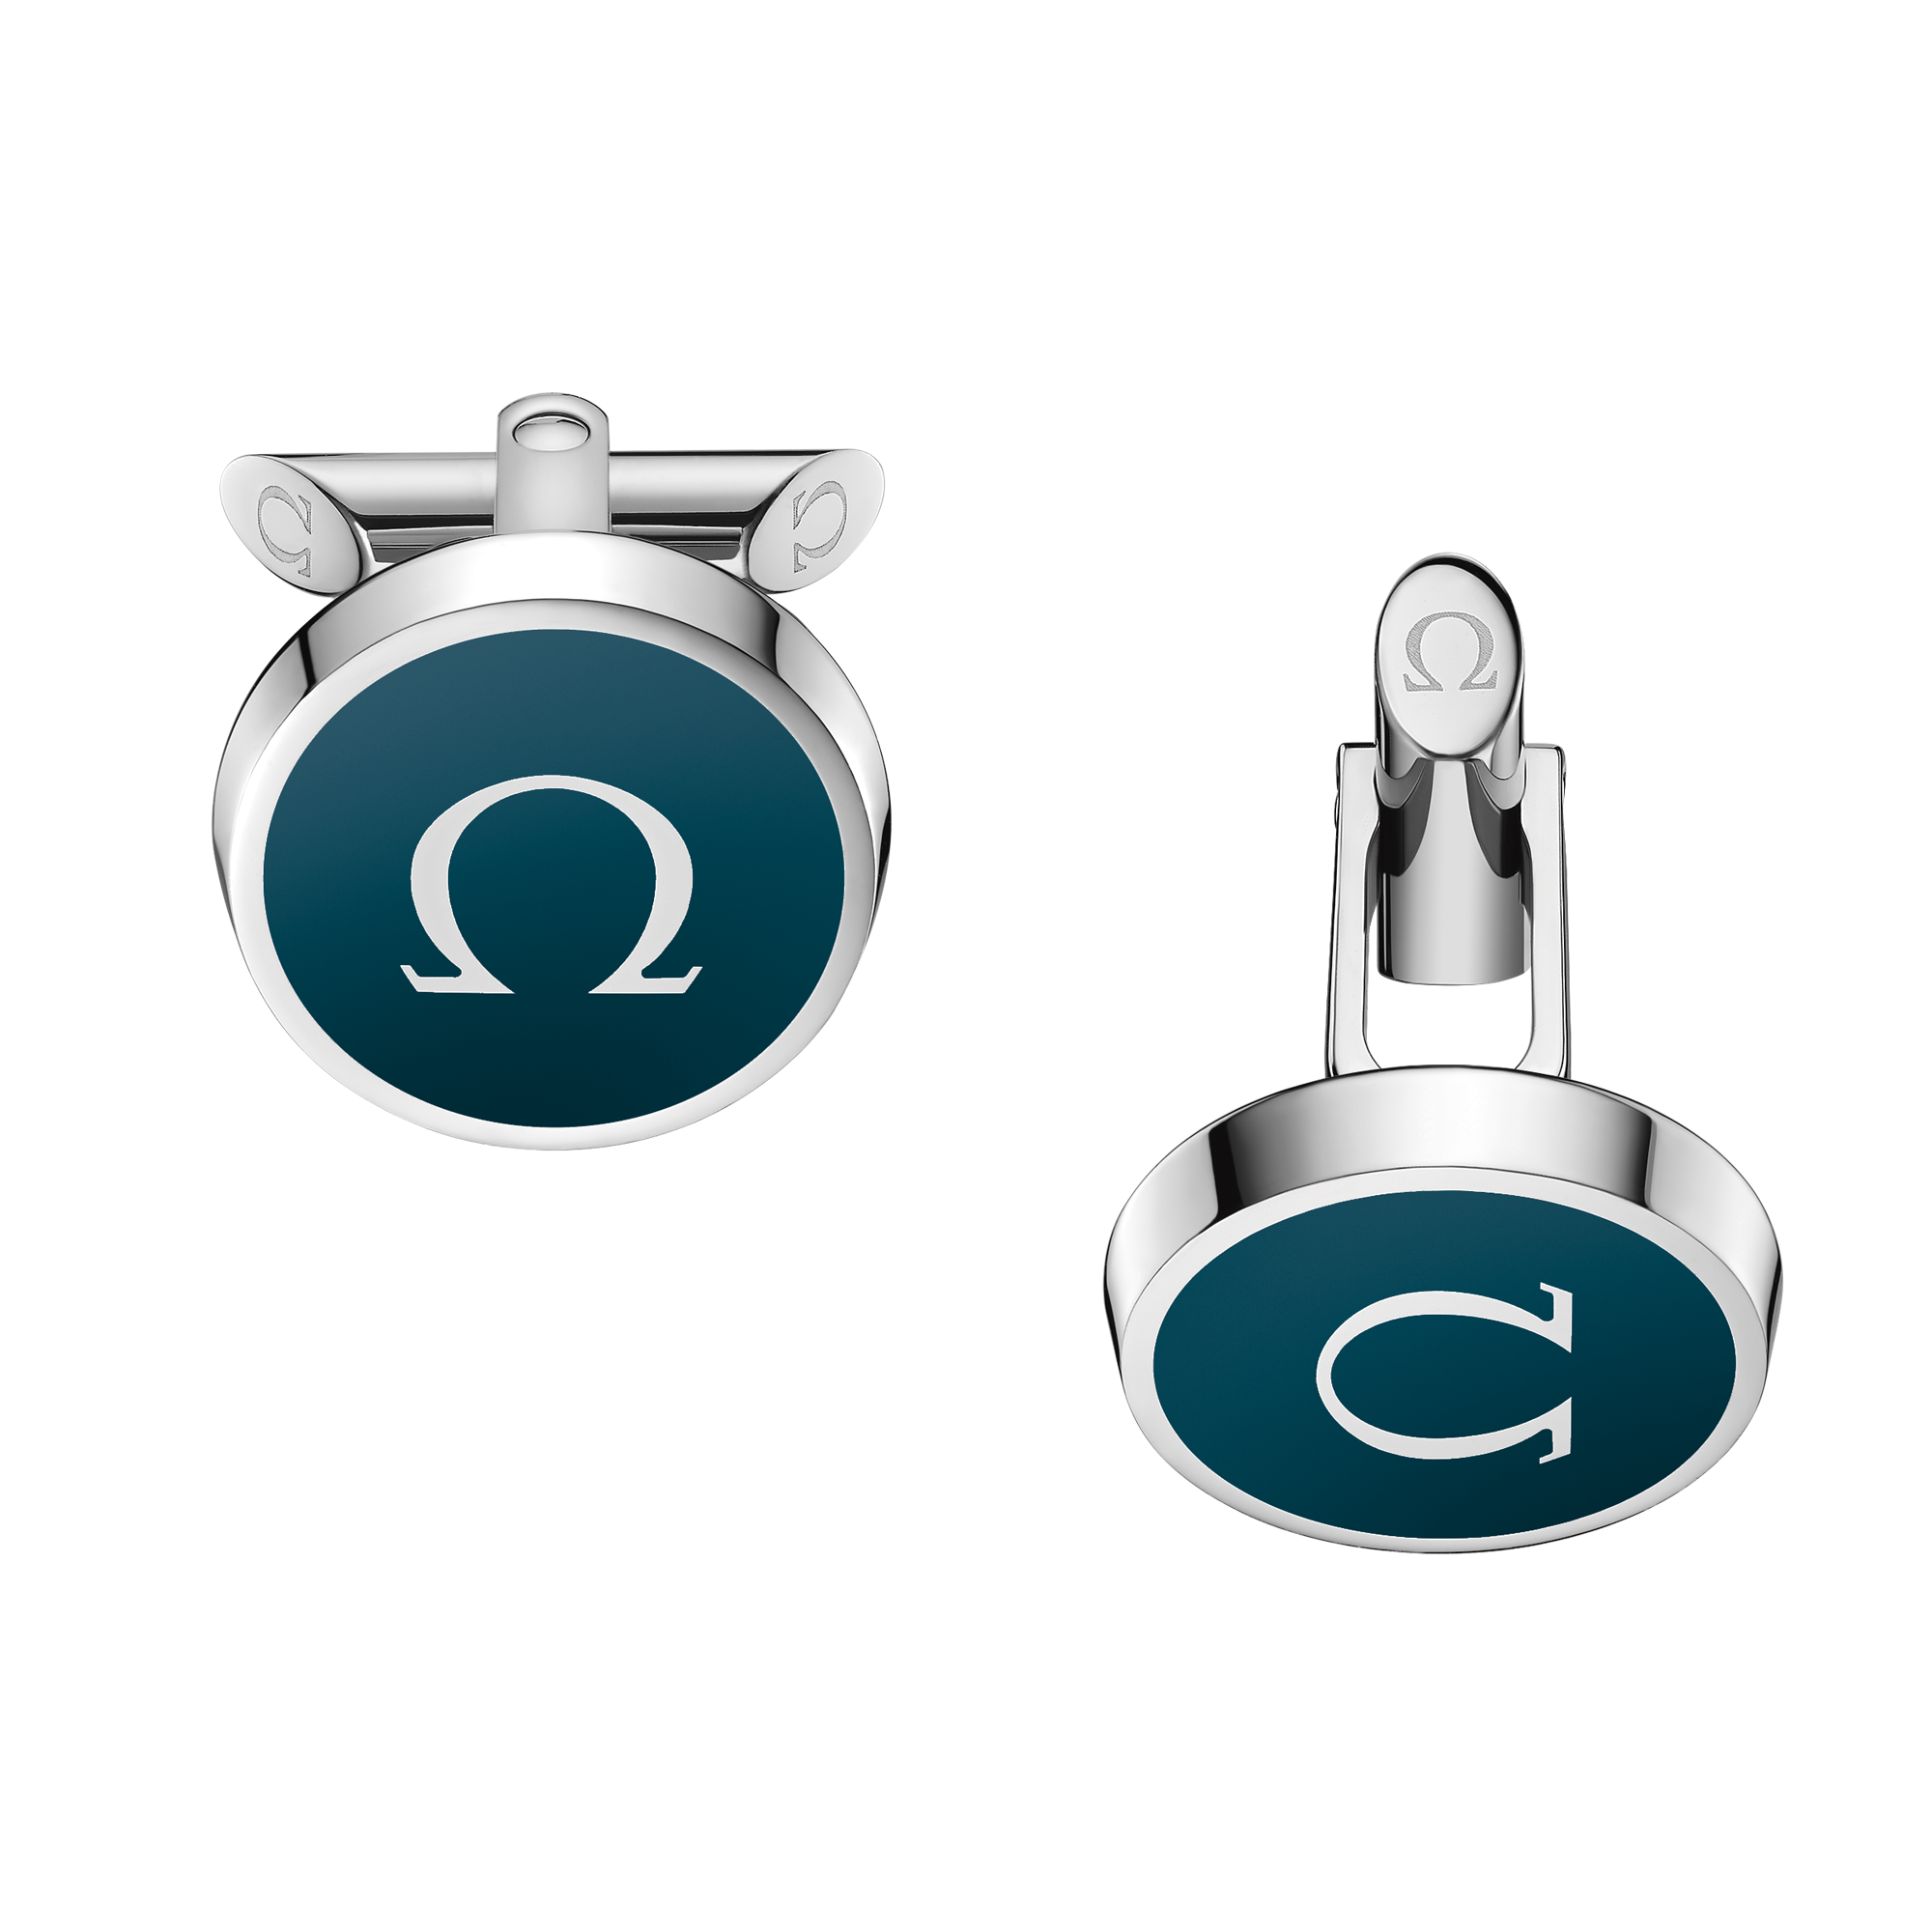 Omegamania Cufflinks, Blue resin, Stainless steel - CA02ST0001105